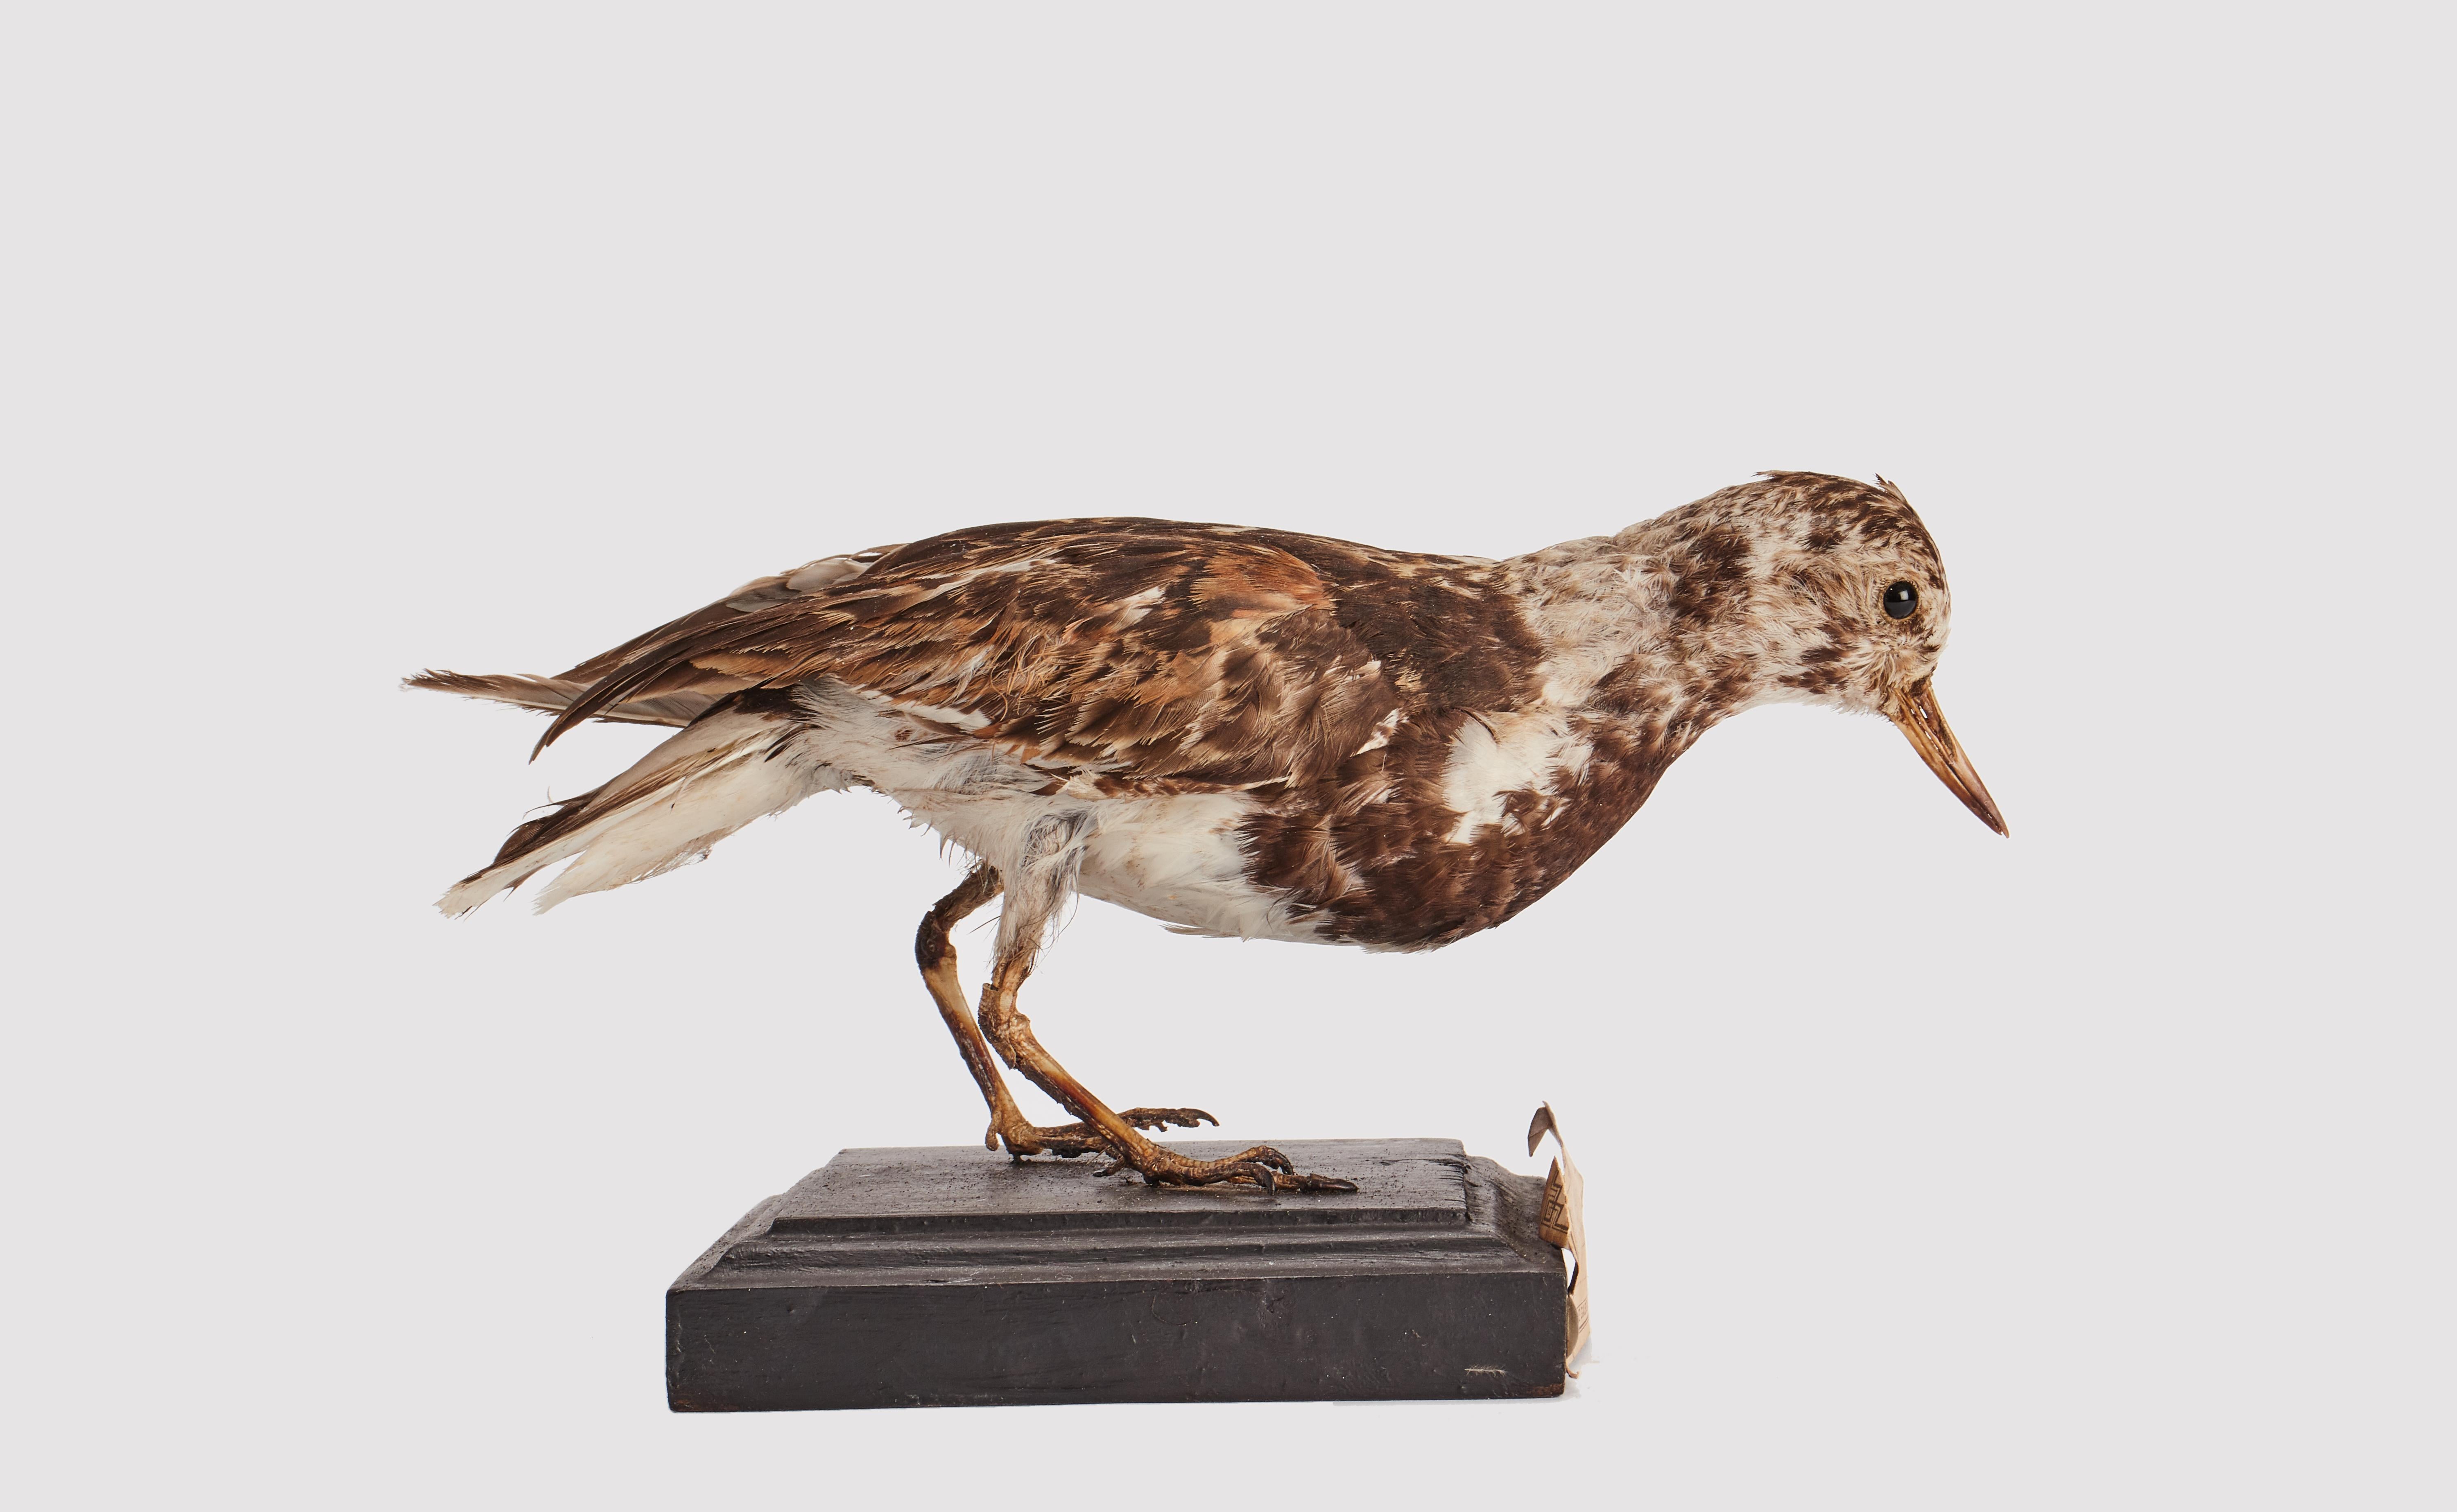 Natural specimen from Wunderkammer Stuffed bird (Arenaria Interpres) Turnstone, mounted on a wooden base with cartouche Specimen for laboratory and Natural history cabinet. S. Brogi Naturalista. Siena, Italy circa 1880.